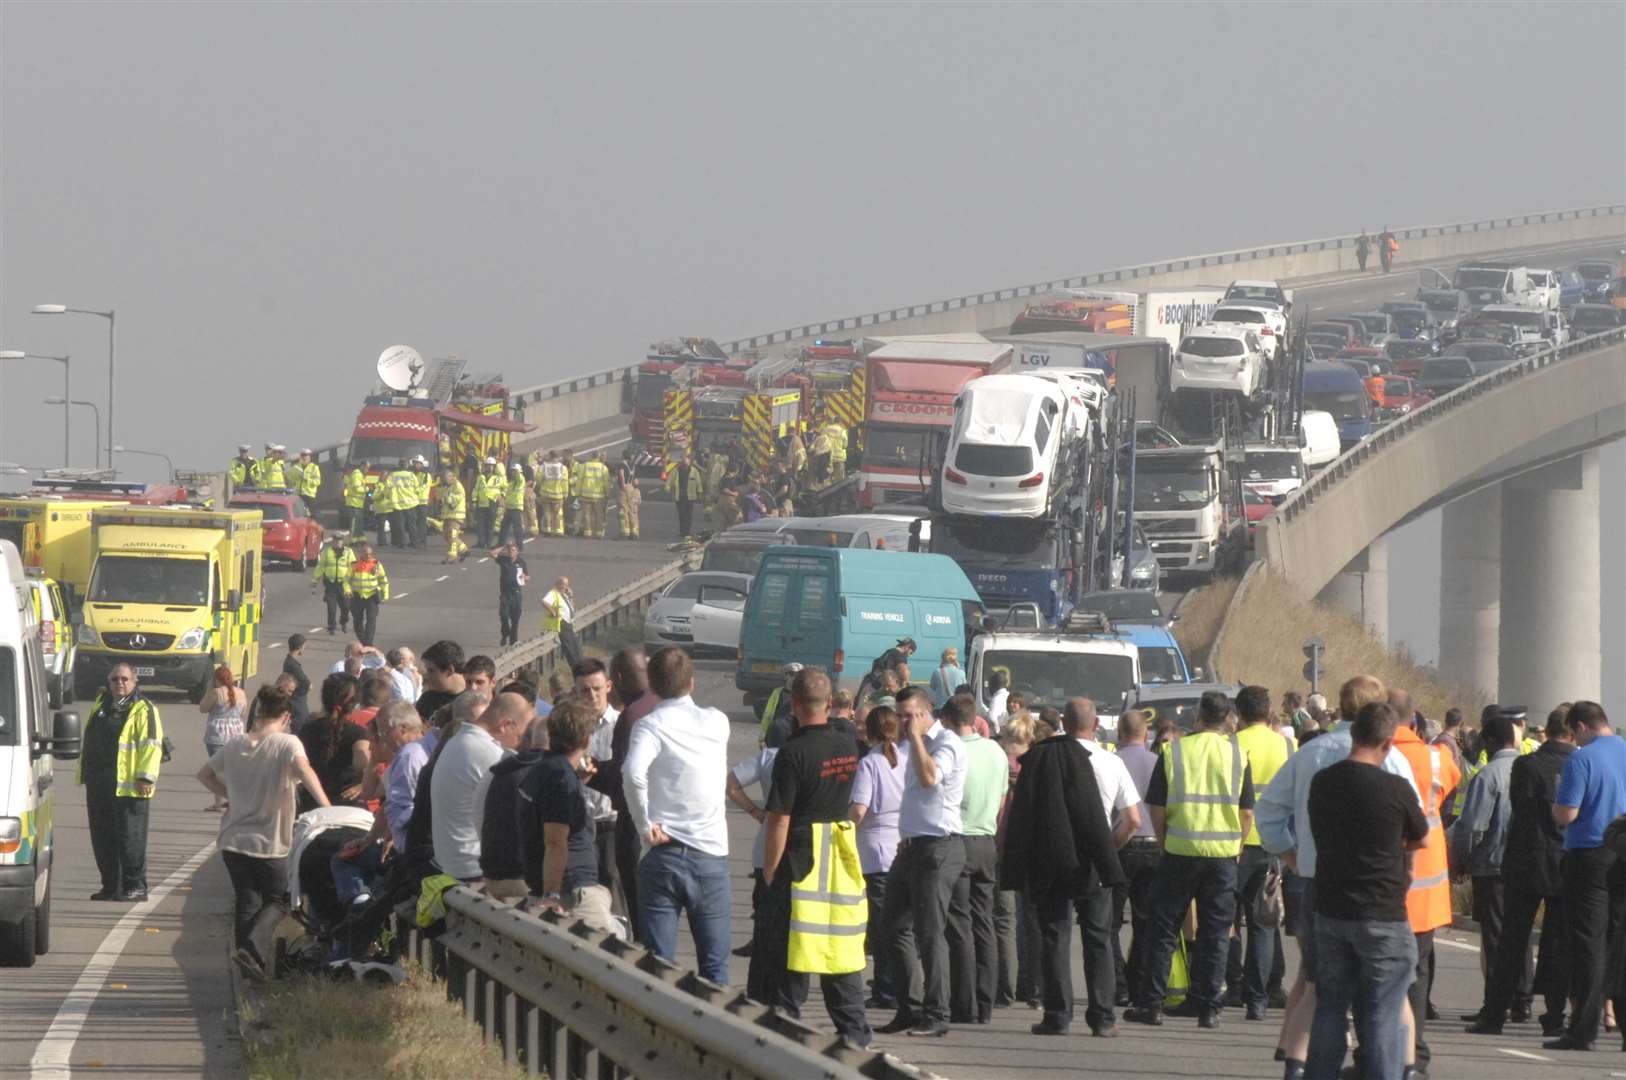 The scene at the Sheppey Crossing following the crash in 2003. Picture: Chris Davey